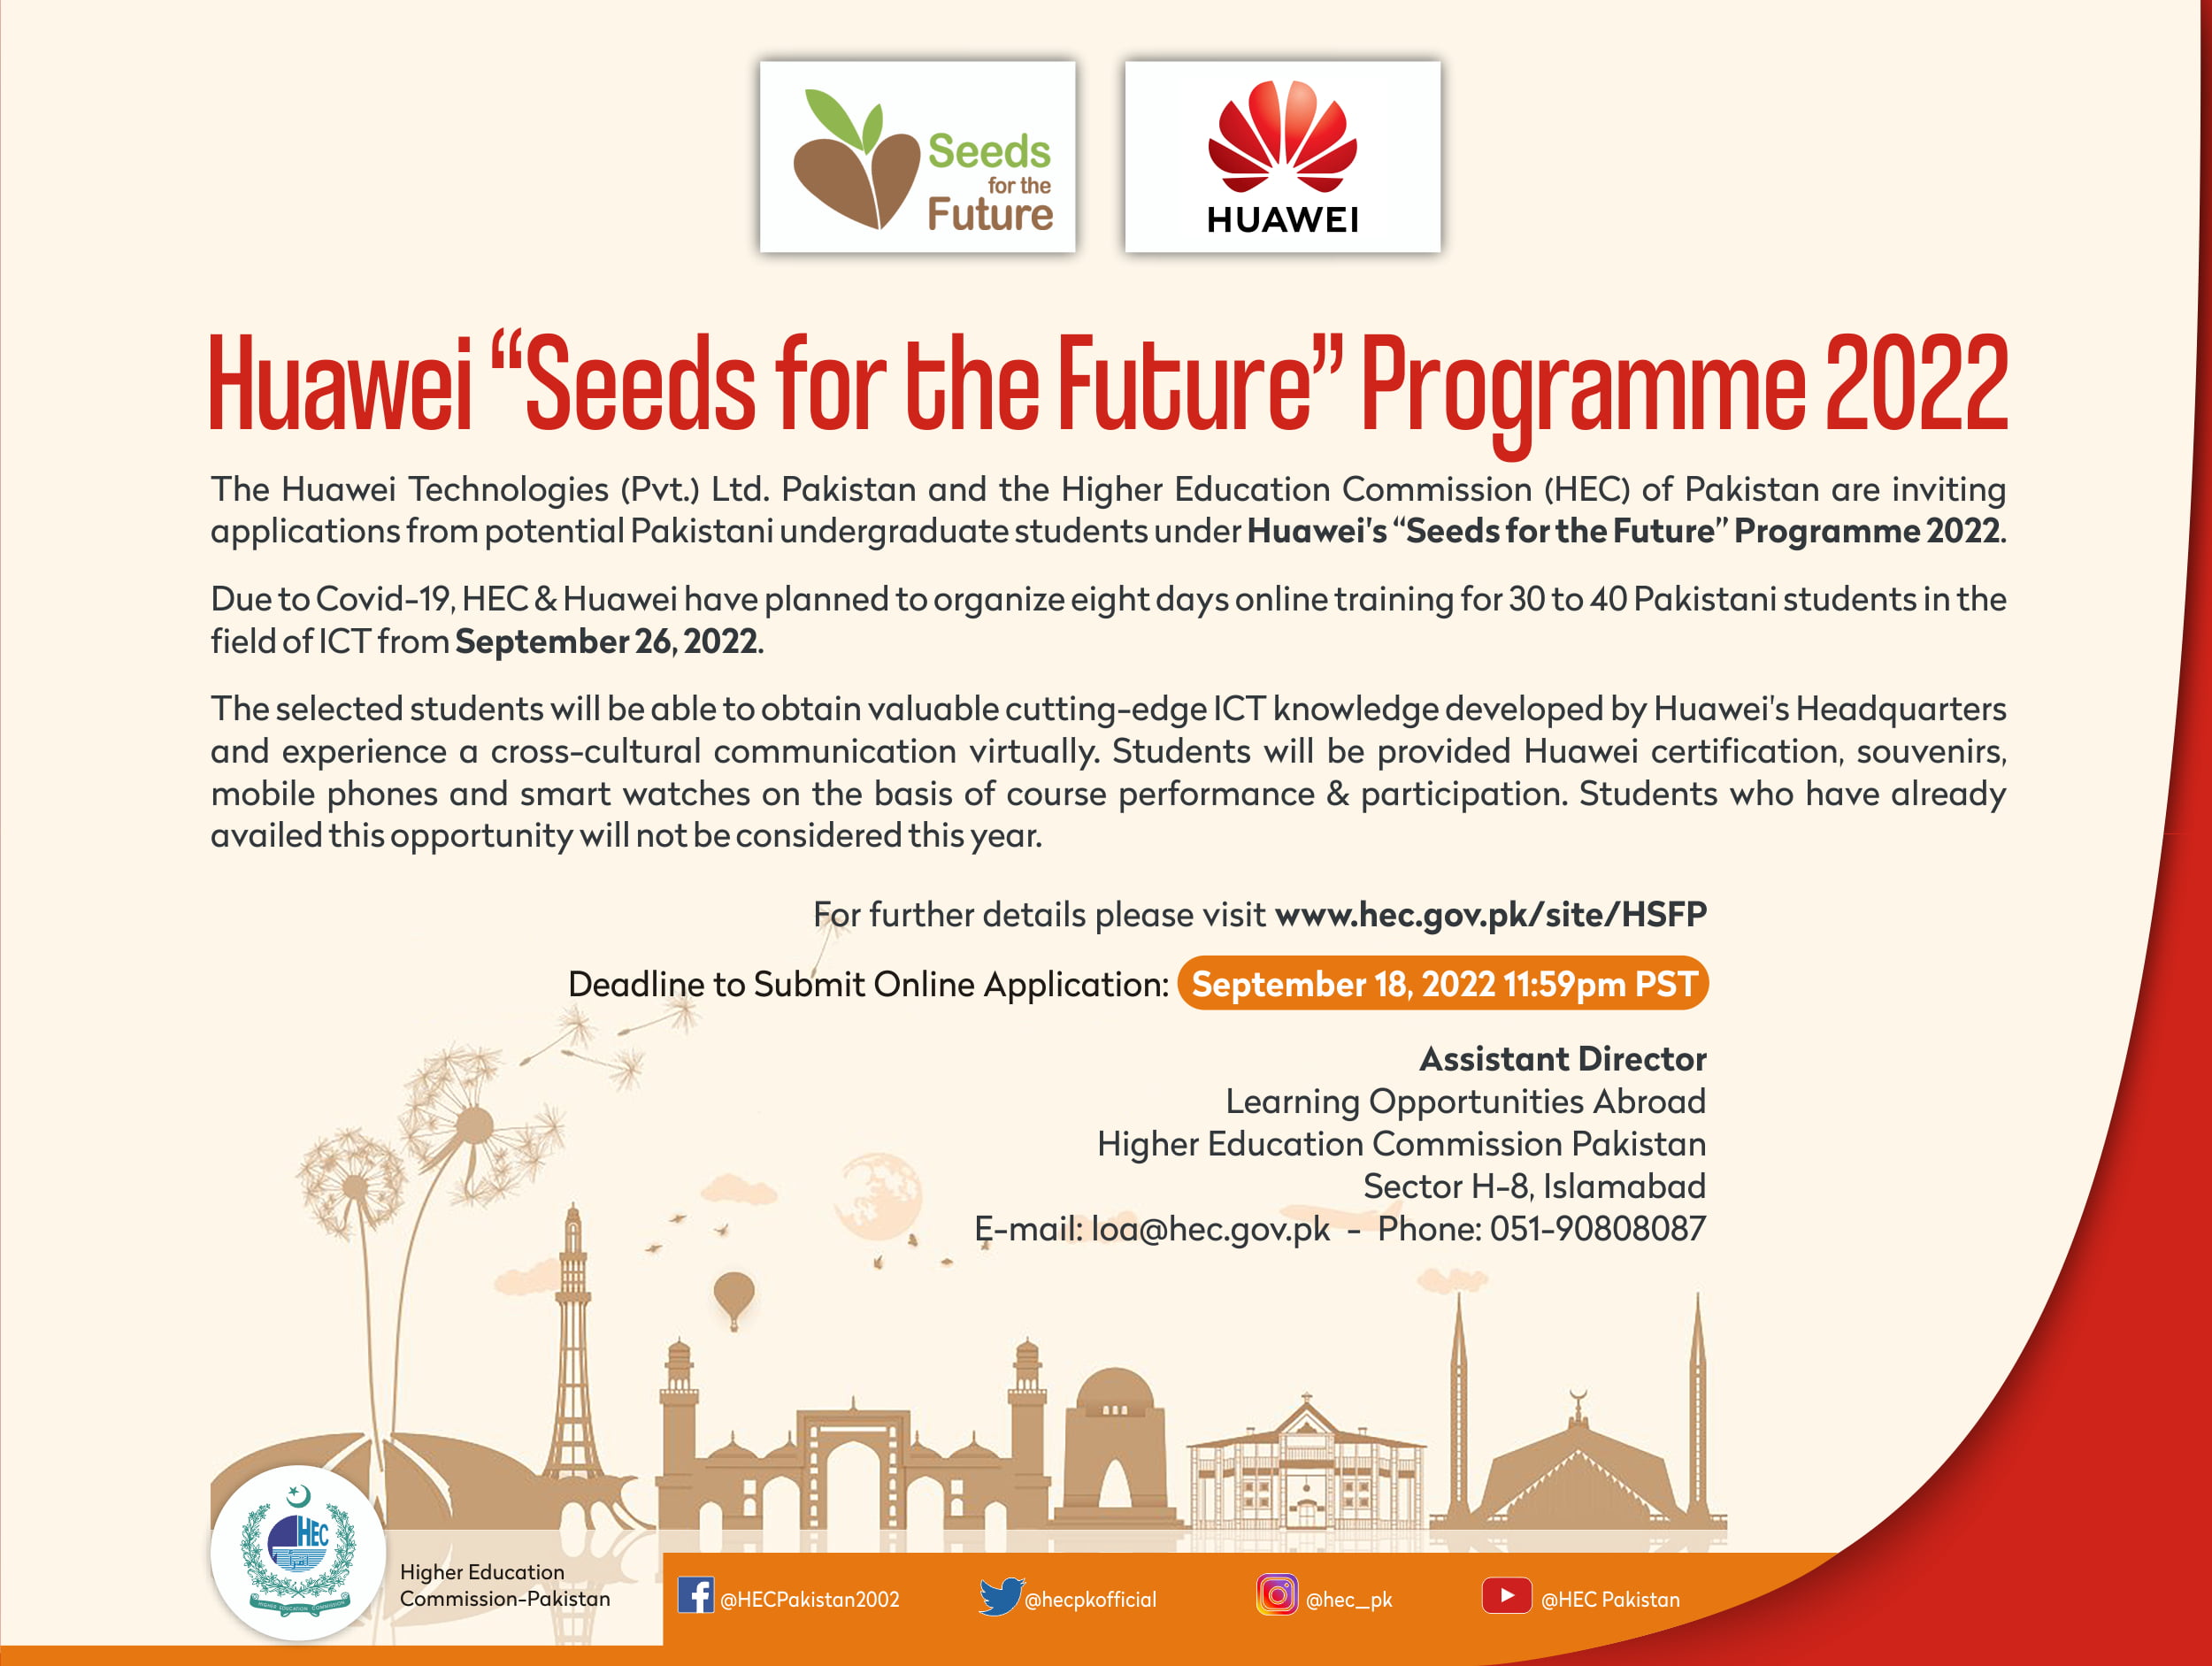 HEC Huawei Seeds for the Future Programme 2022